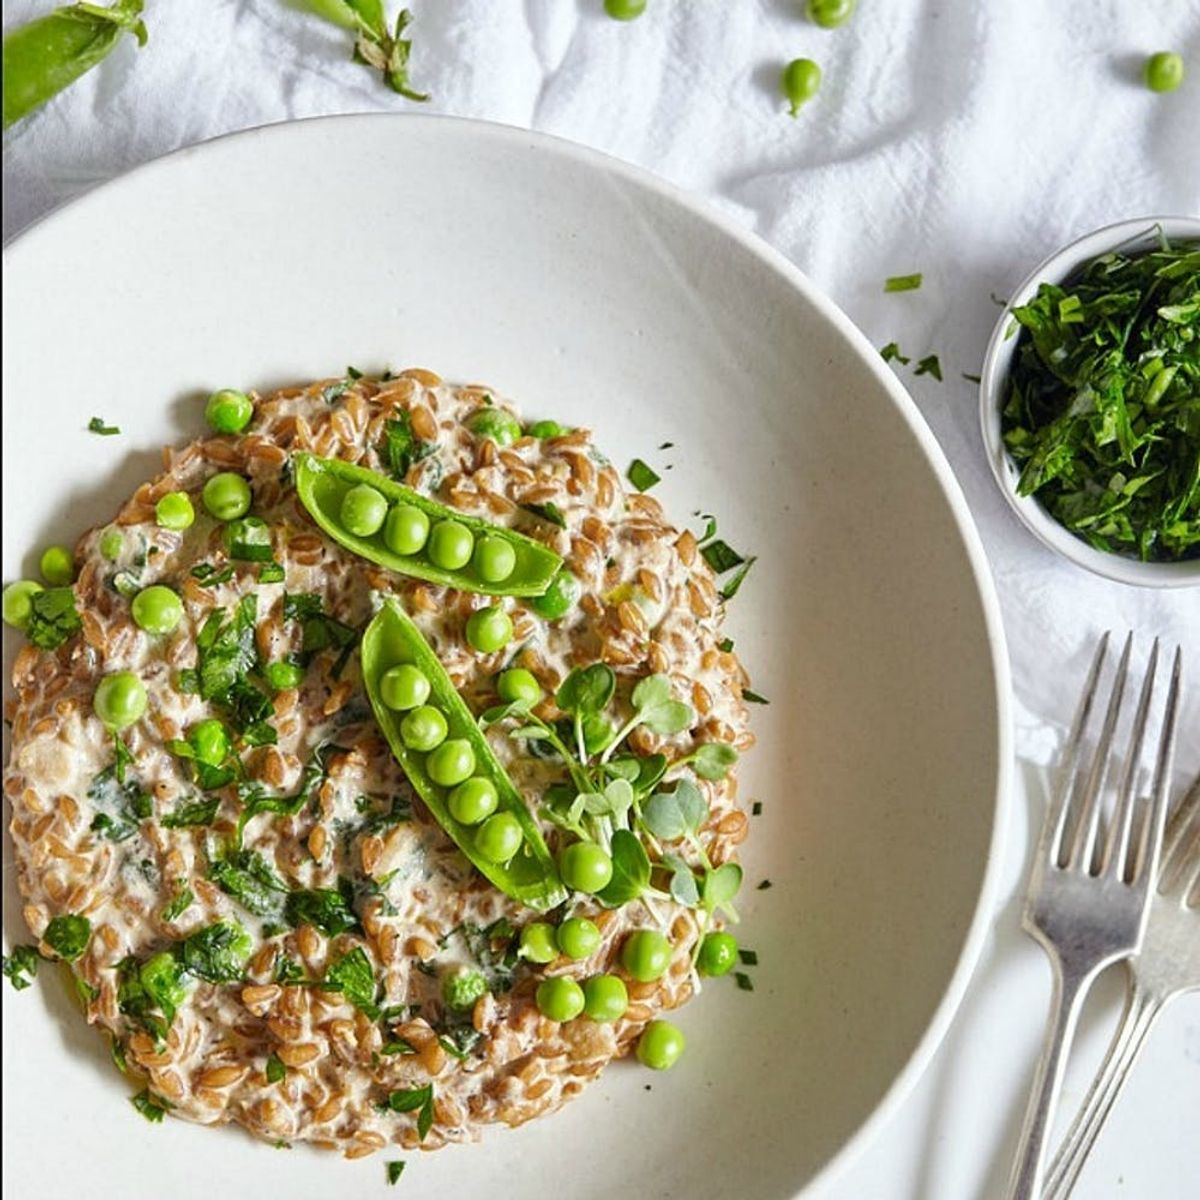 13 Vegetarian Dinner Recipes That Have Us Screaming “Yes, Peas!”